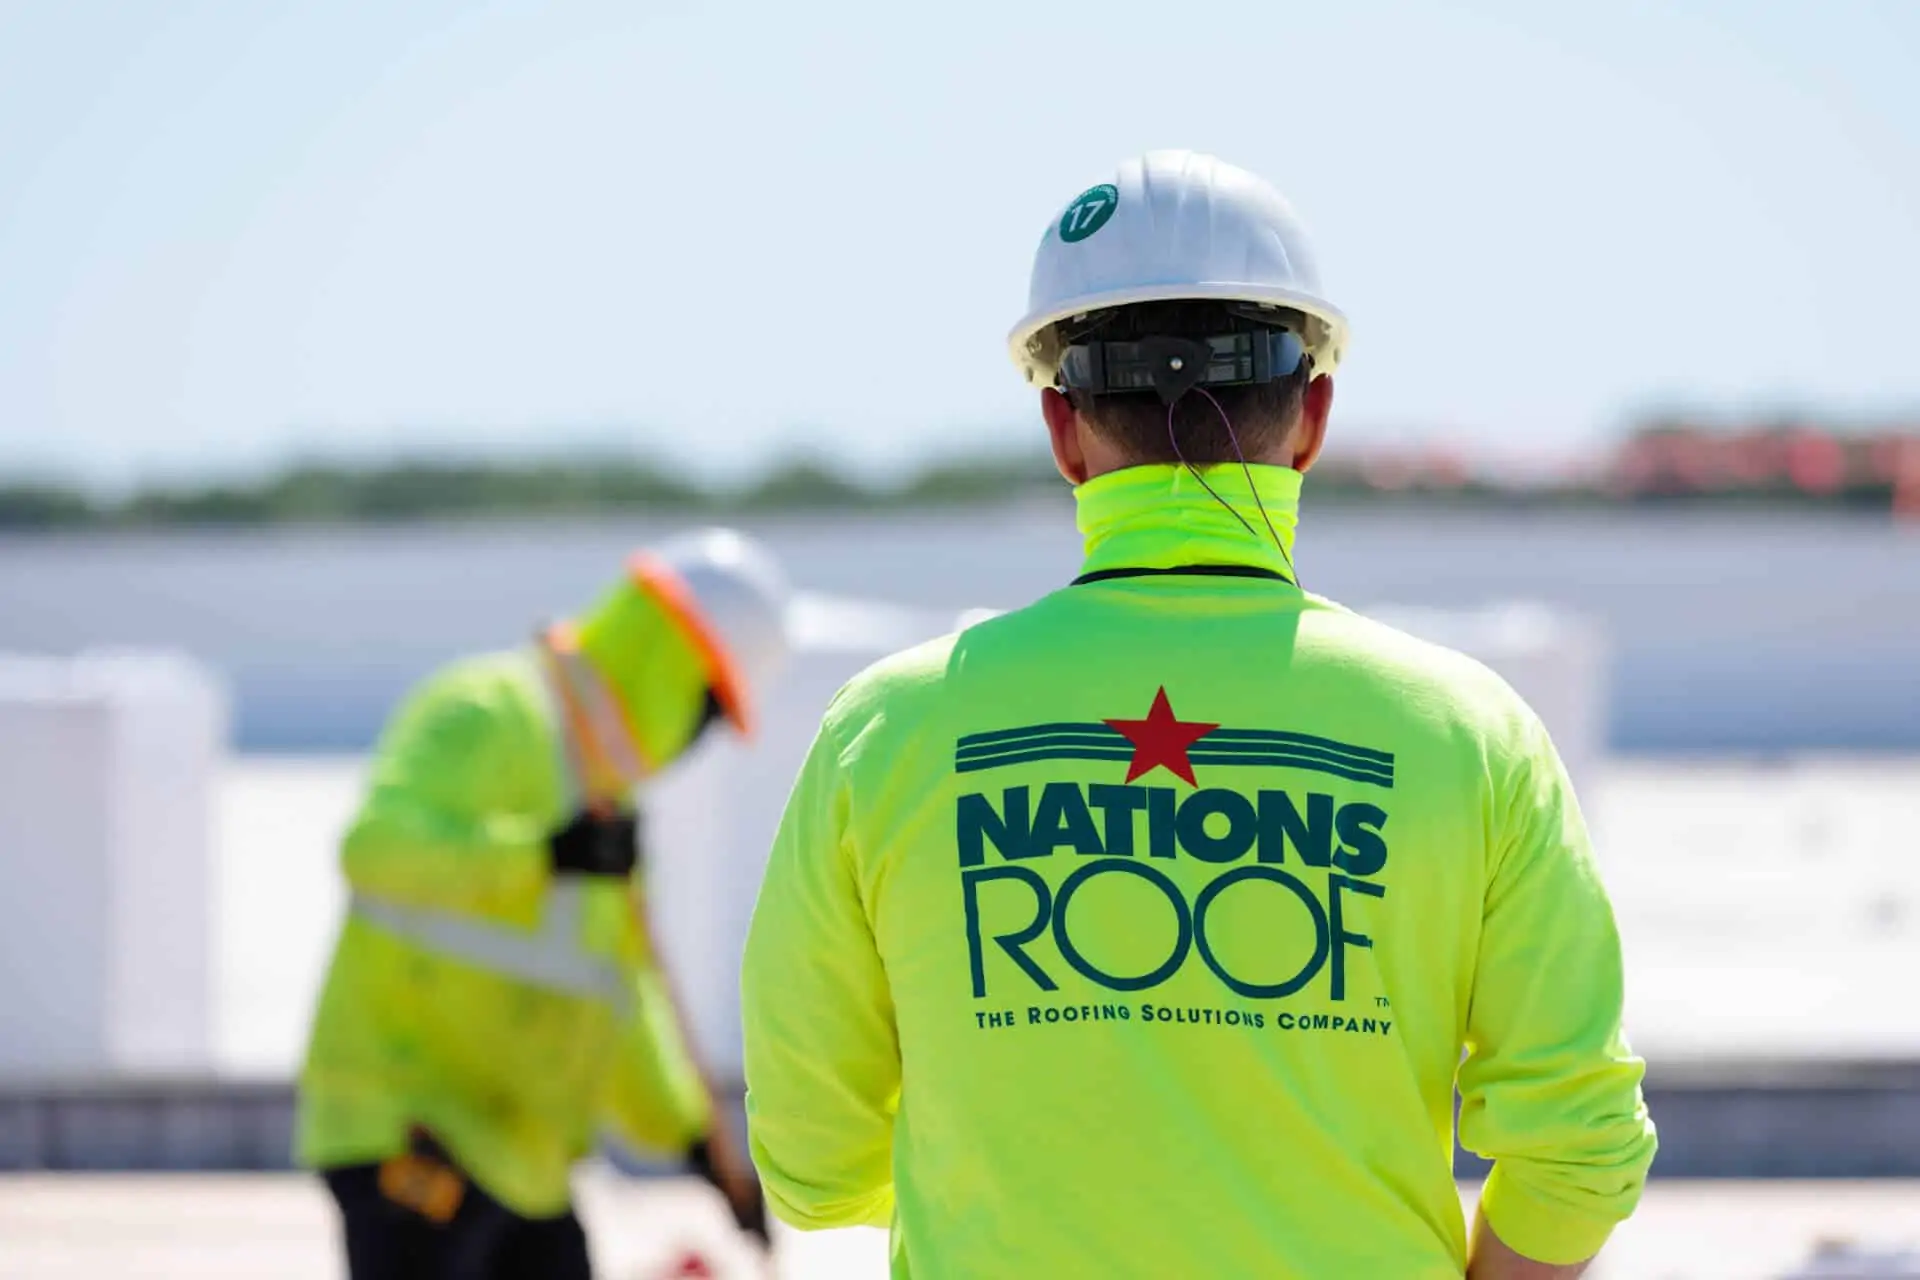 nations roof careers image